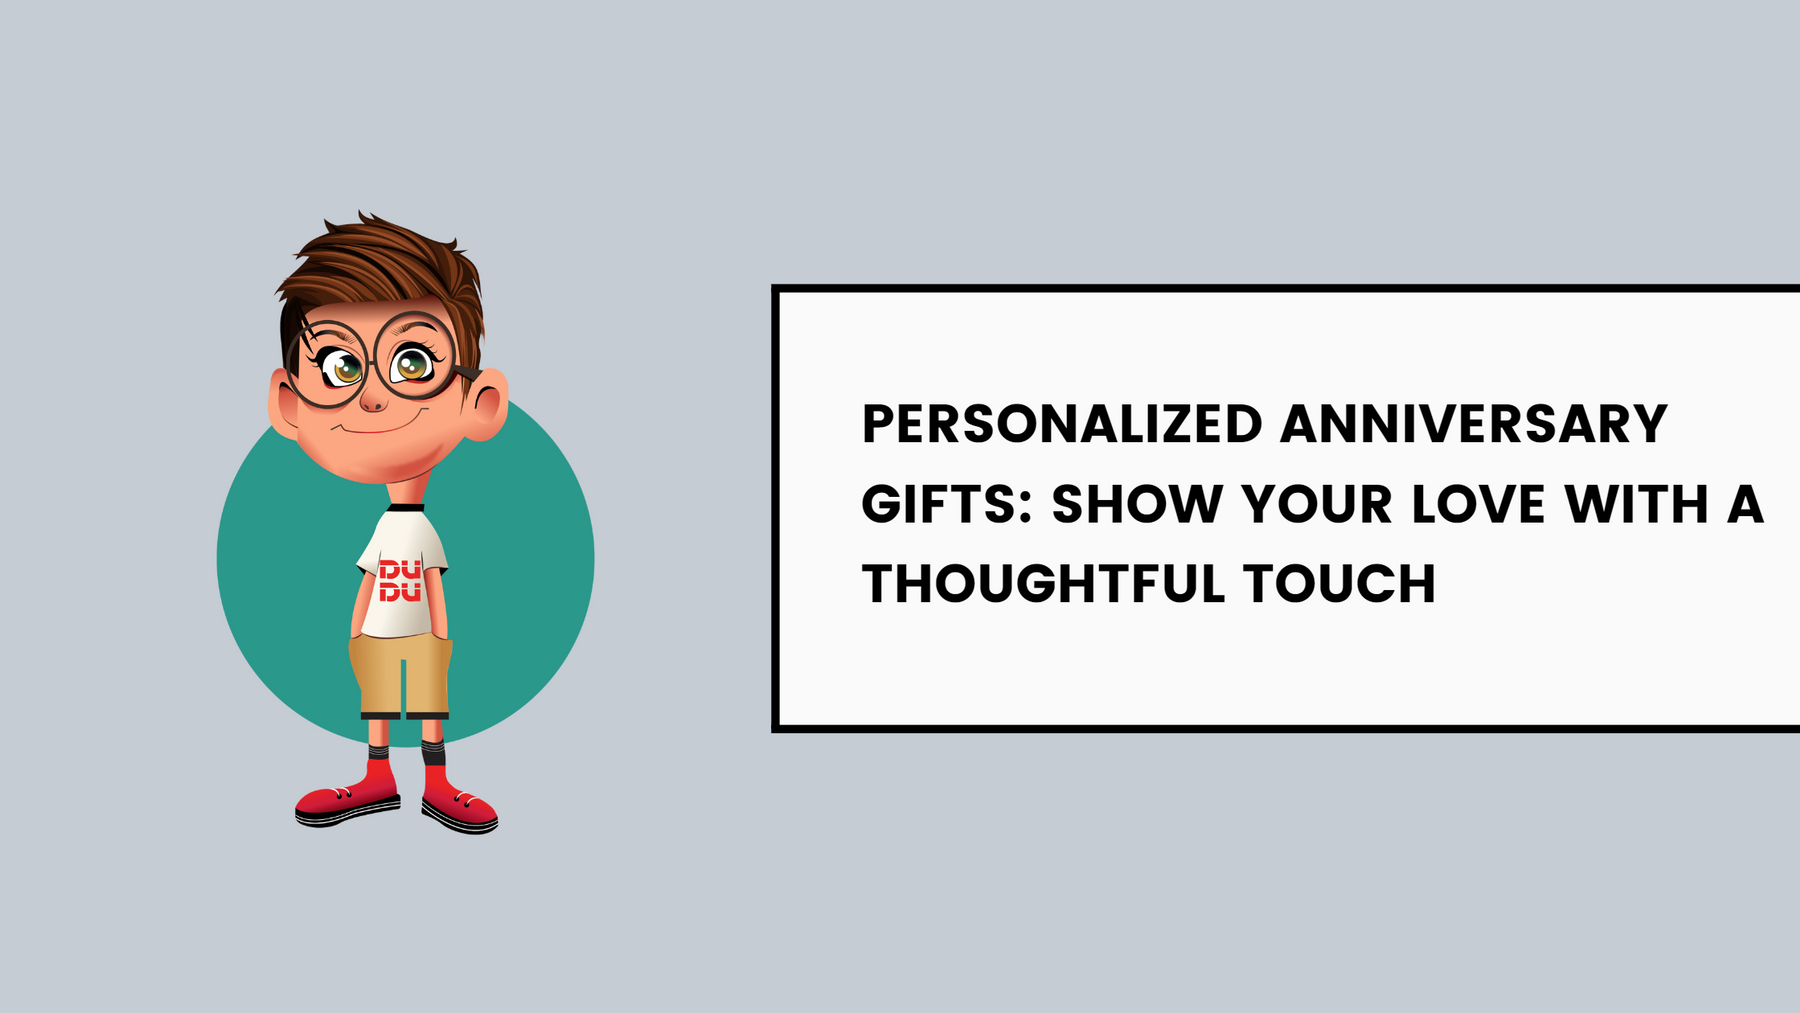 Personalized Anniversary Gifts: Show Your Love with a Thoughtful Touch